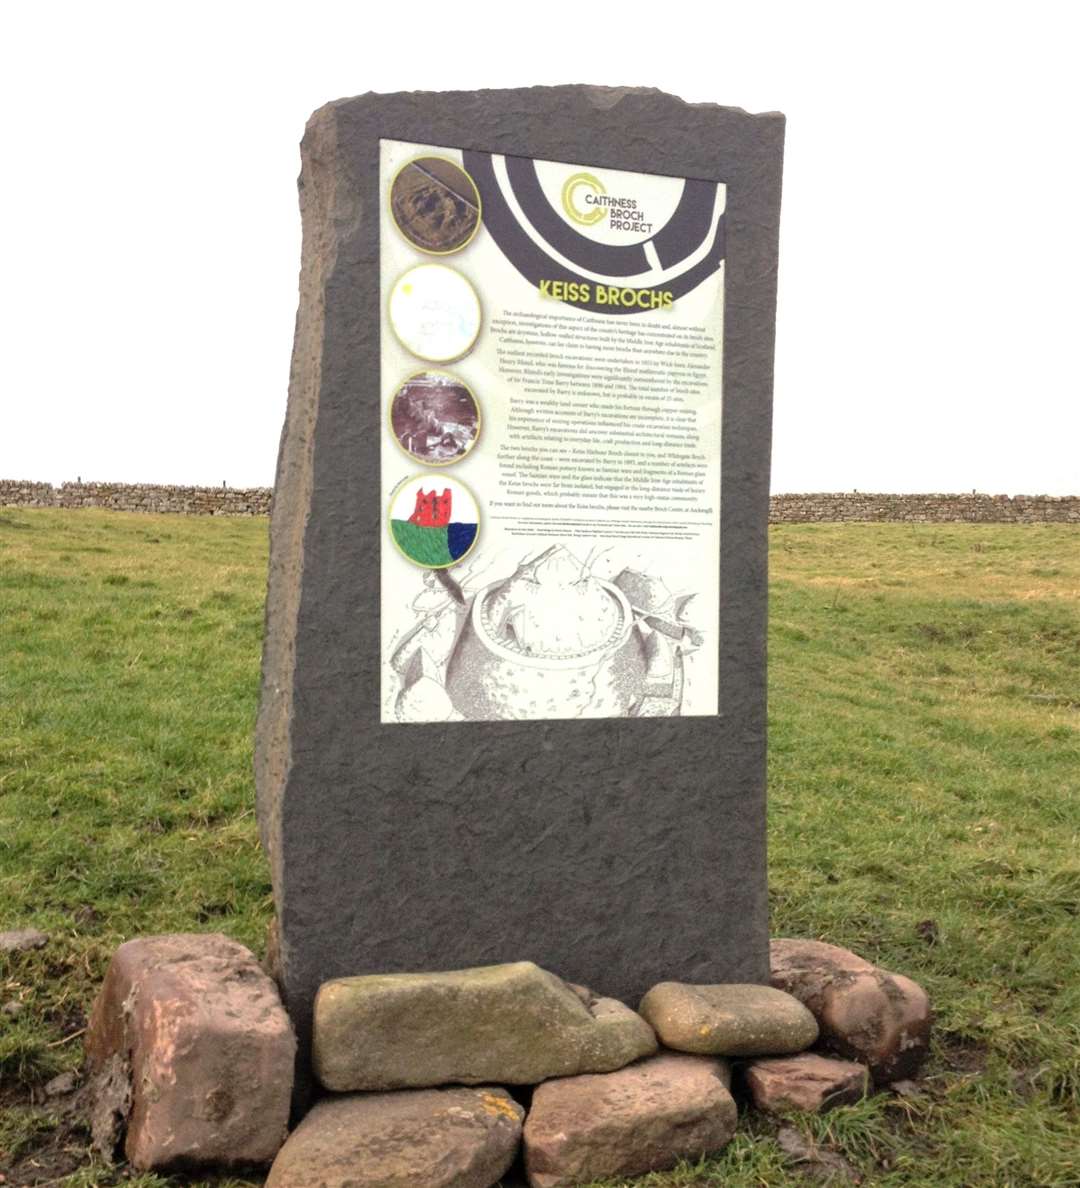 The Caithness Broch Project installed the interpretation panel last year with help from community service workers.